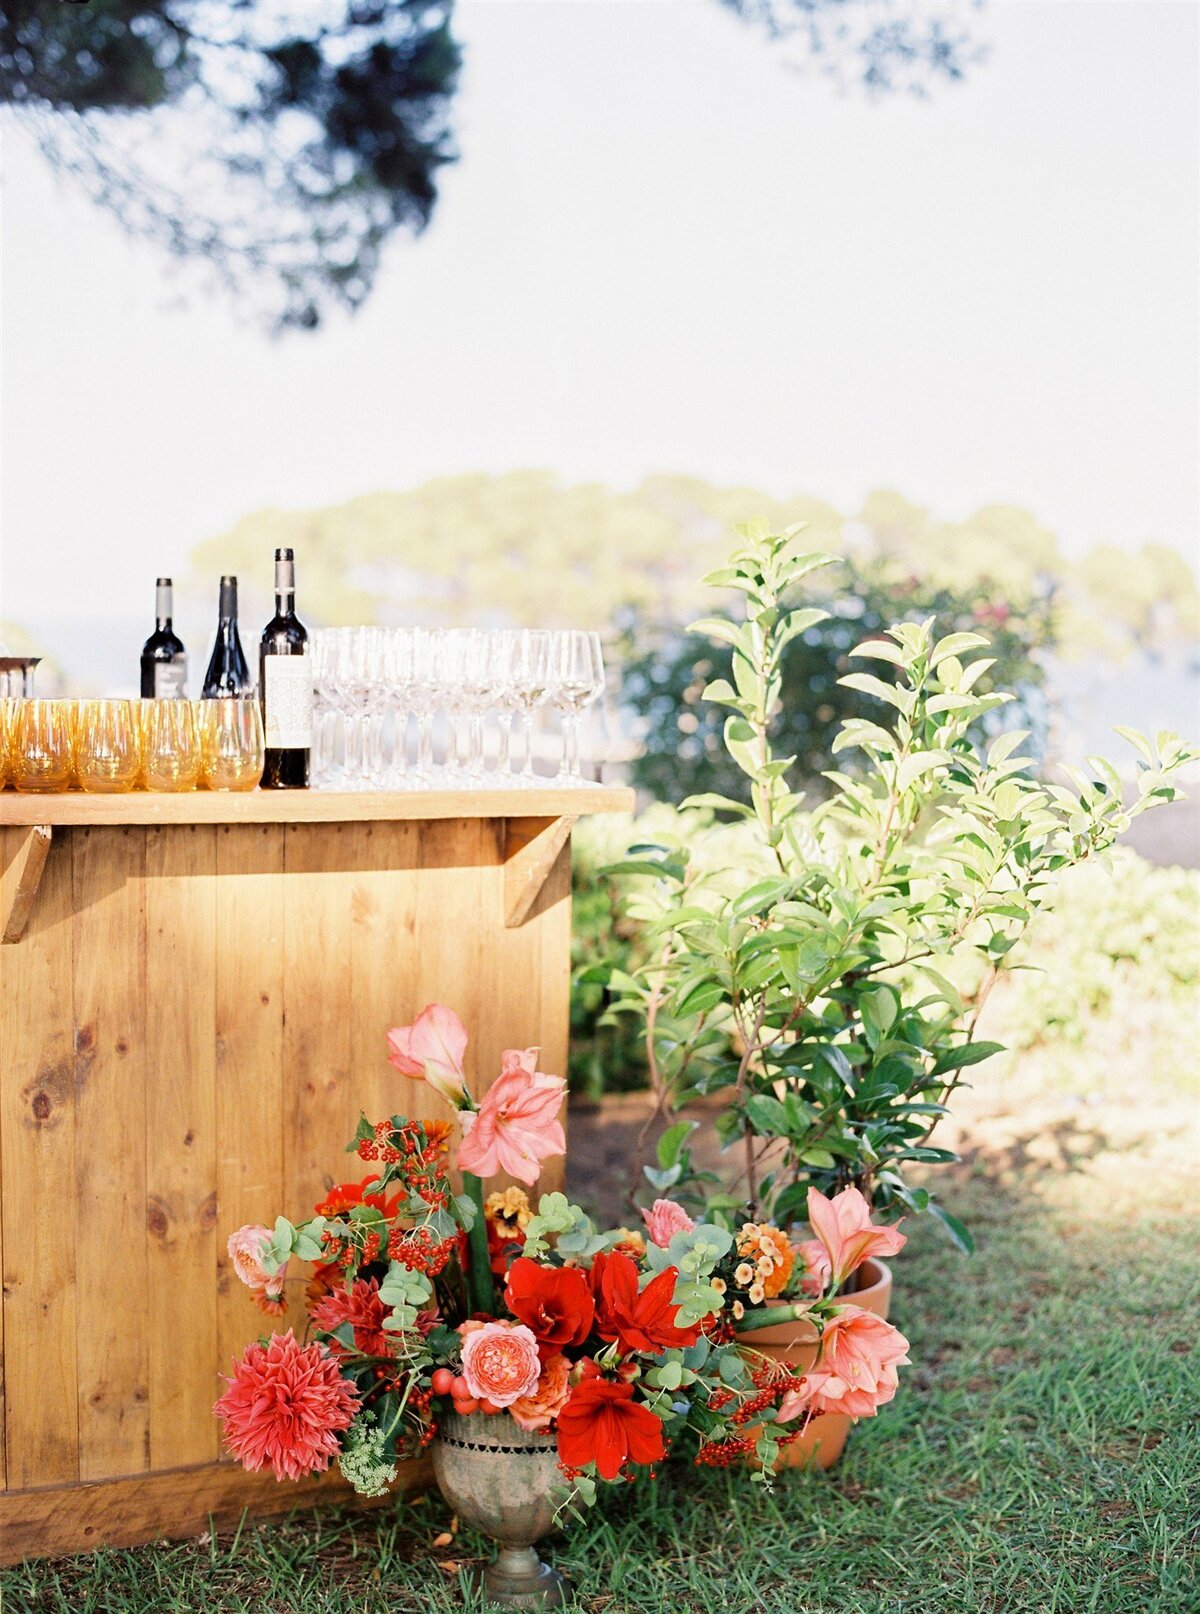 Outdoor cocktail, nature theme, fresh flowers